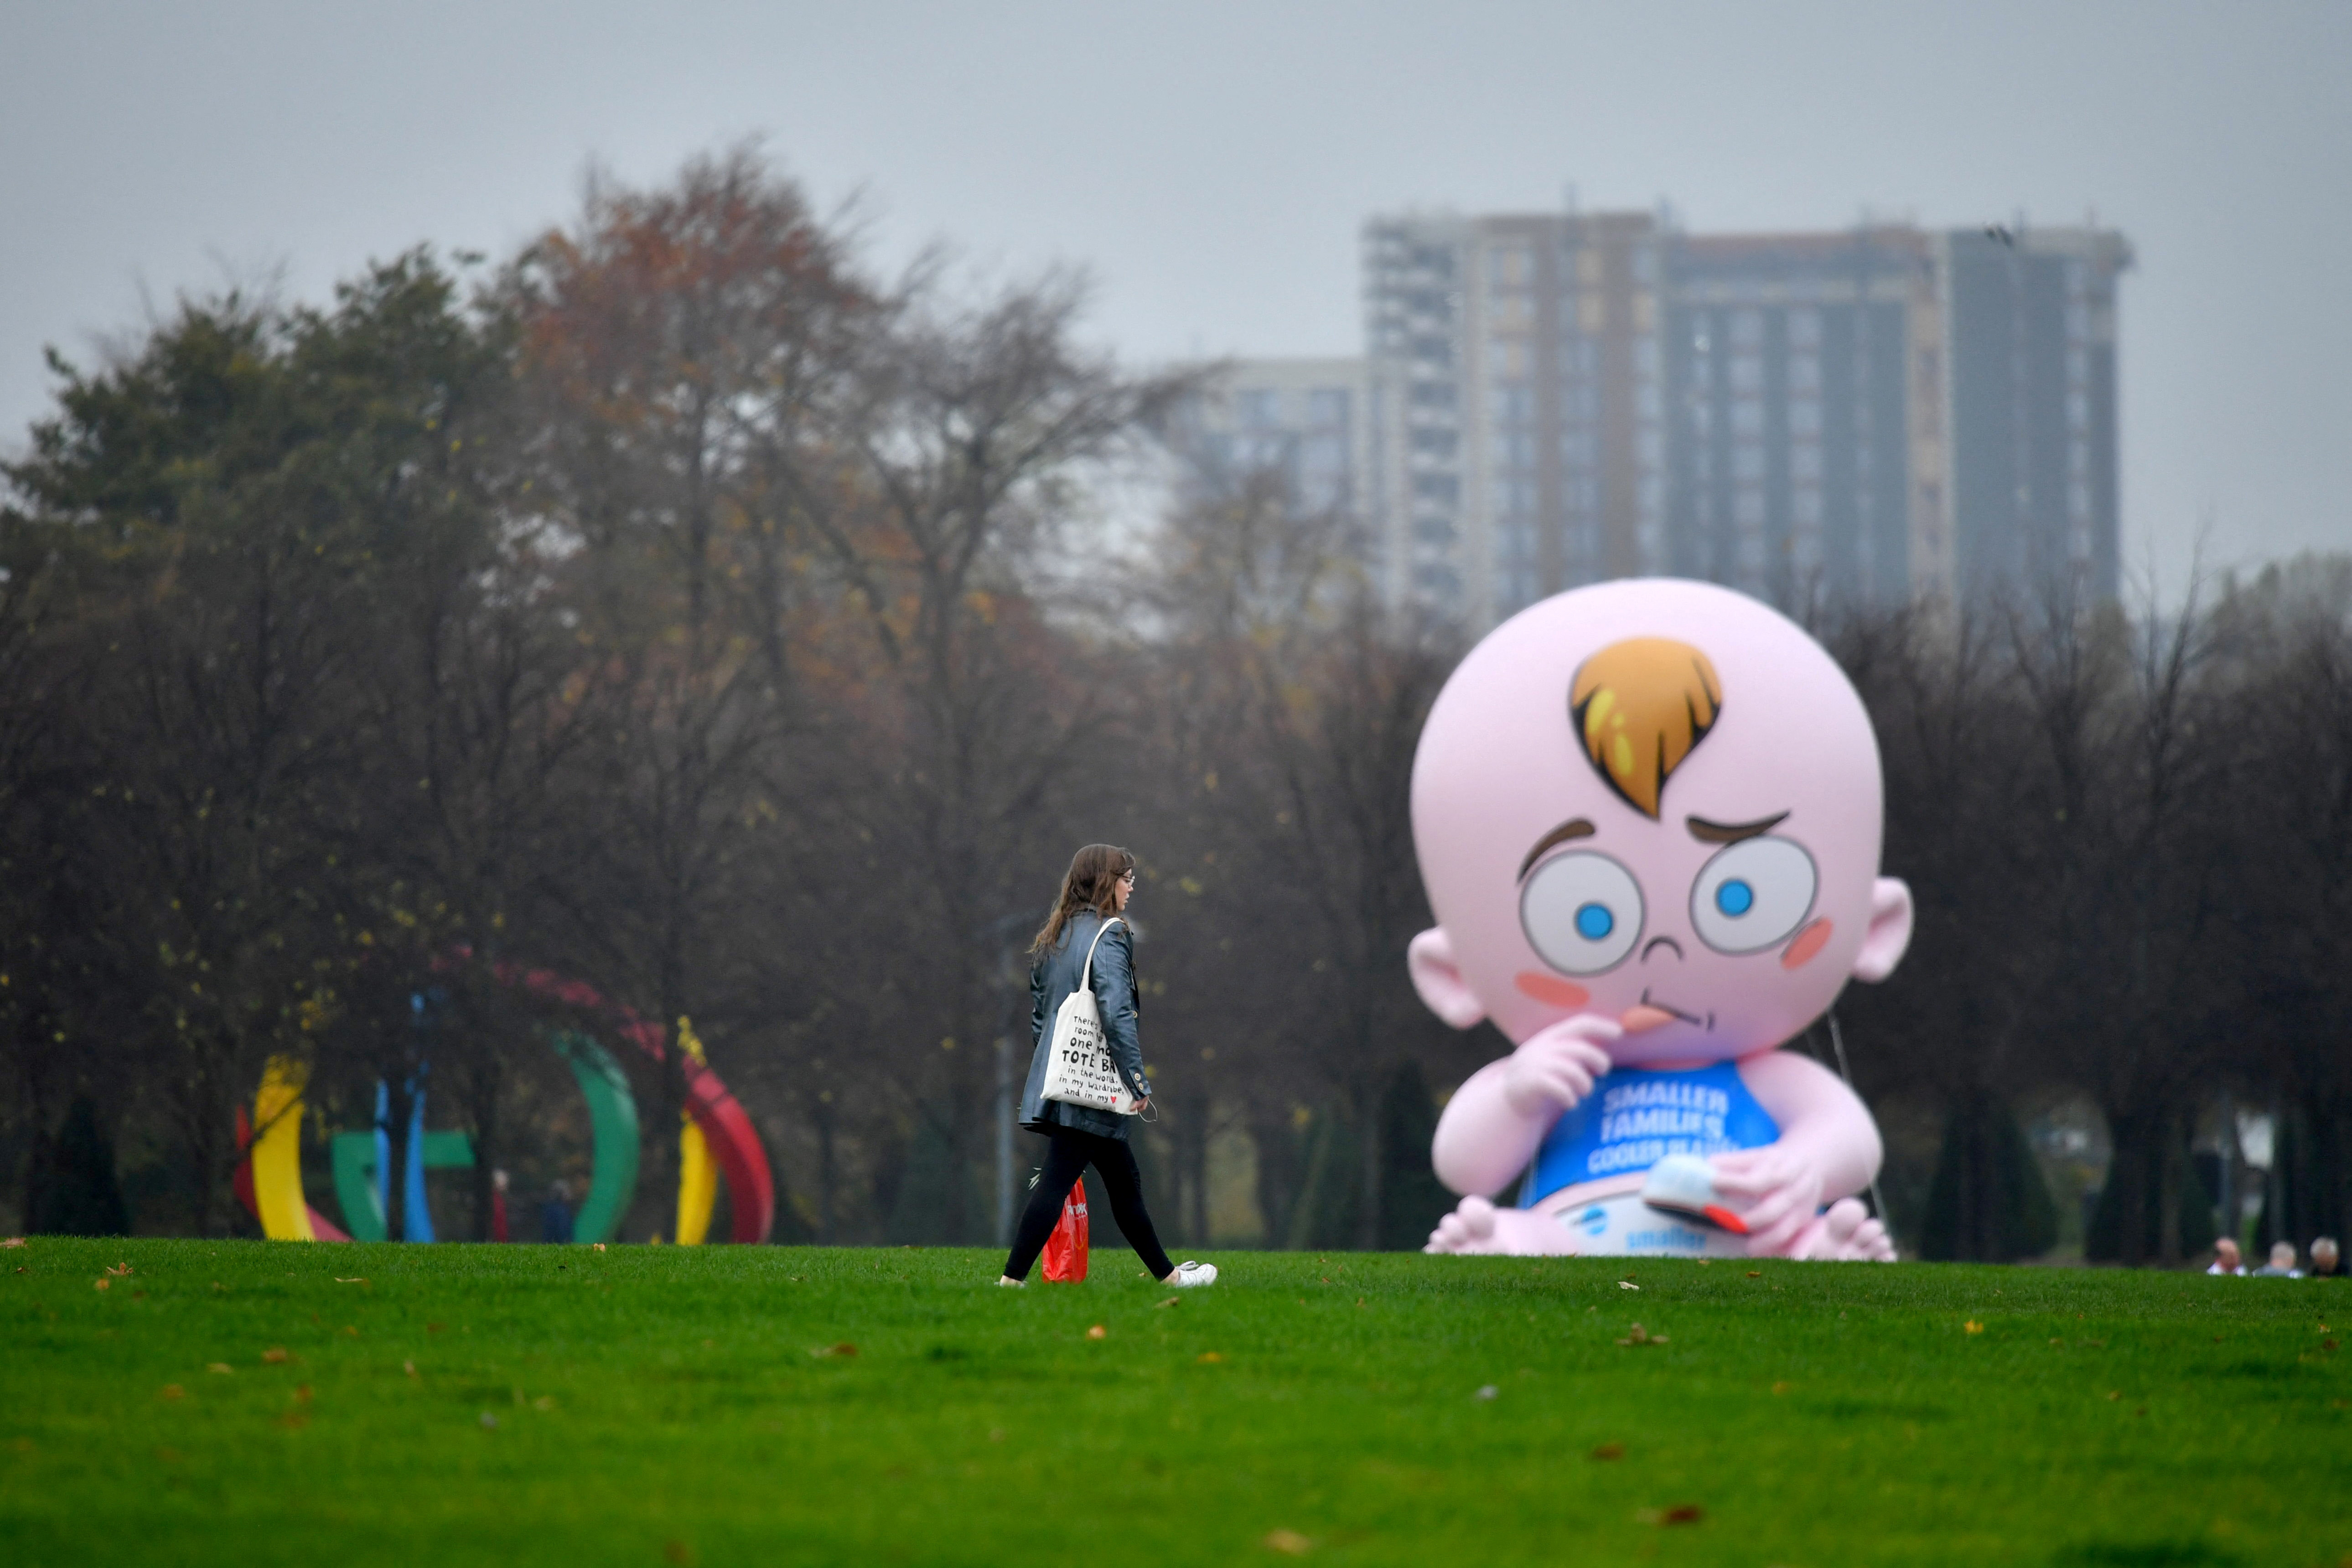 A woman walks past a giant baby balloon inflated by Climate Change activists in the rain at Glasgow Green as the UN Climate Change Conference (COP26) takes place, in Glasgow